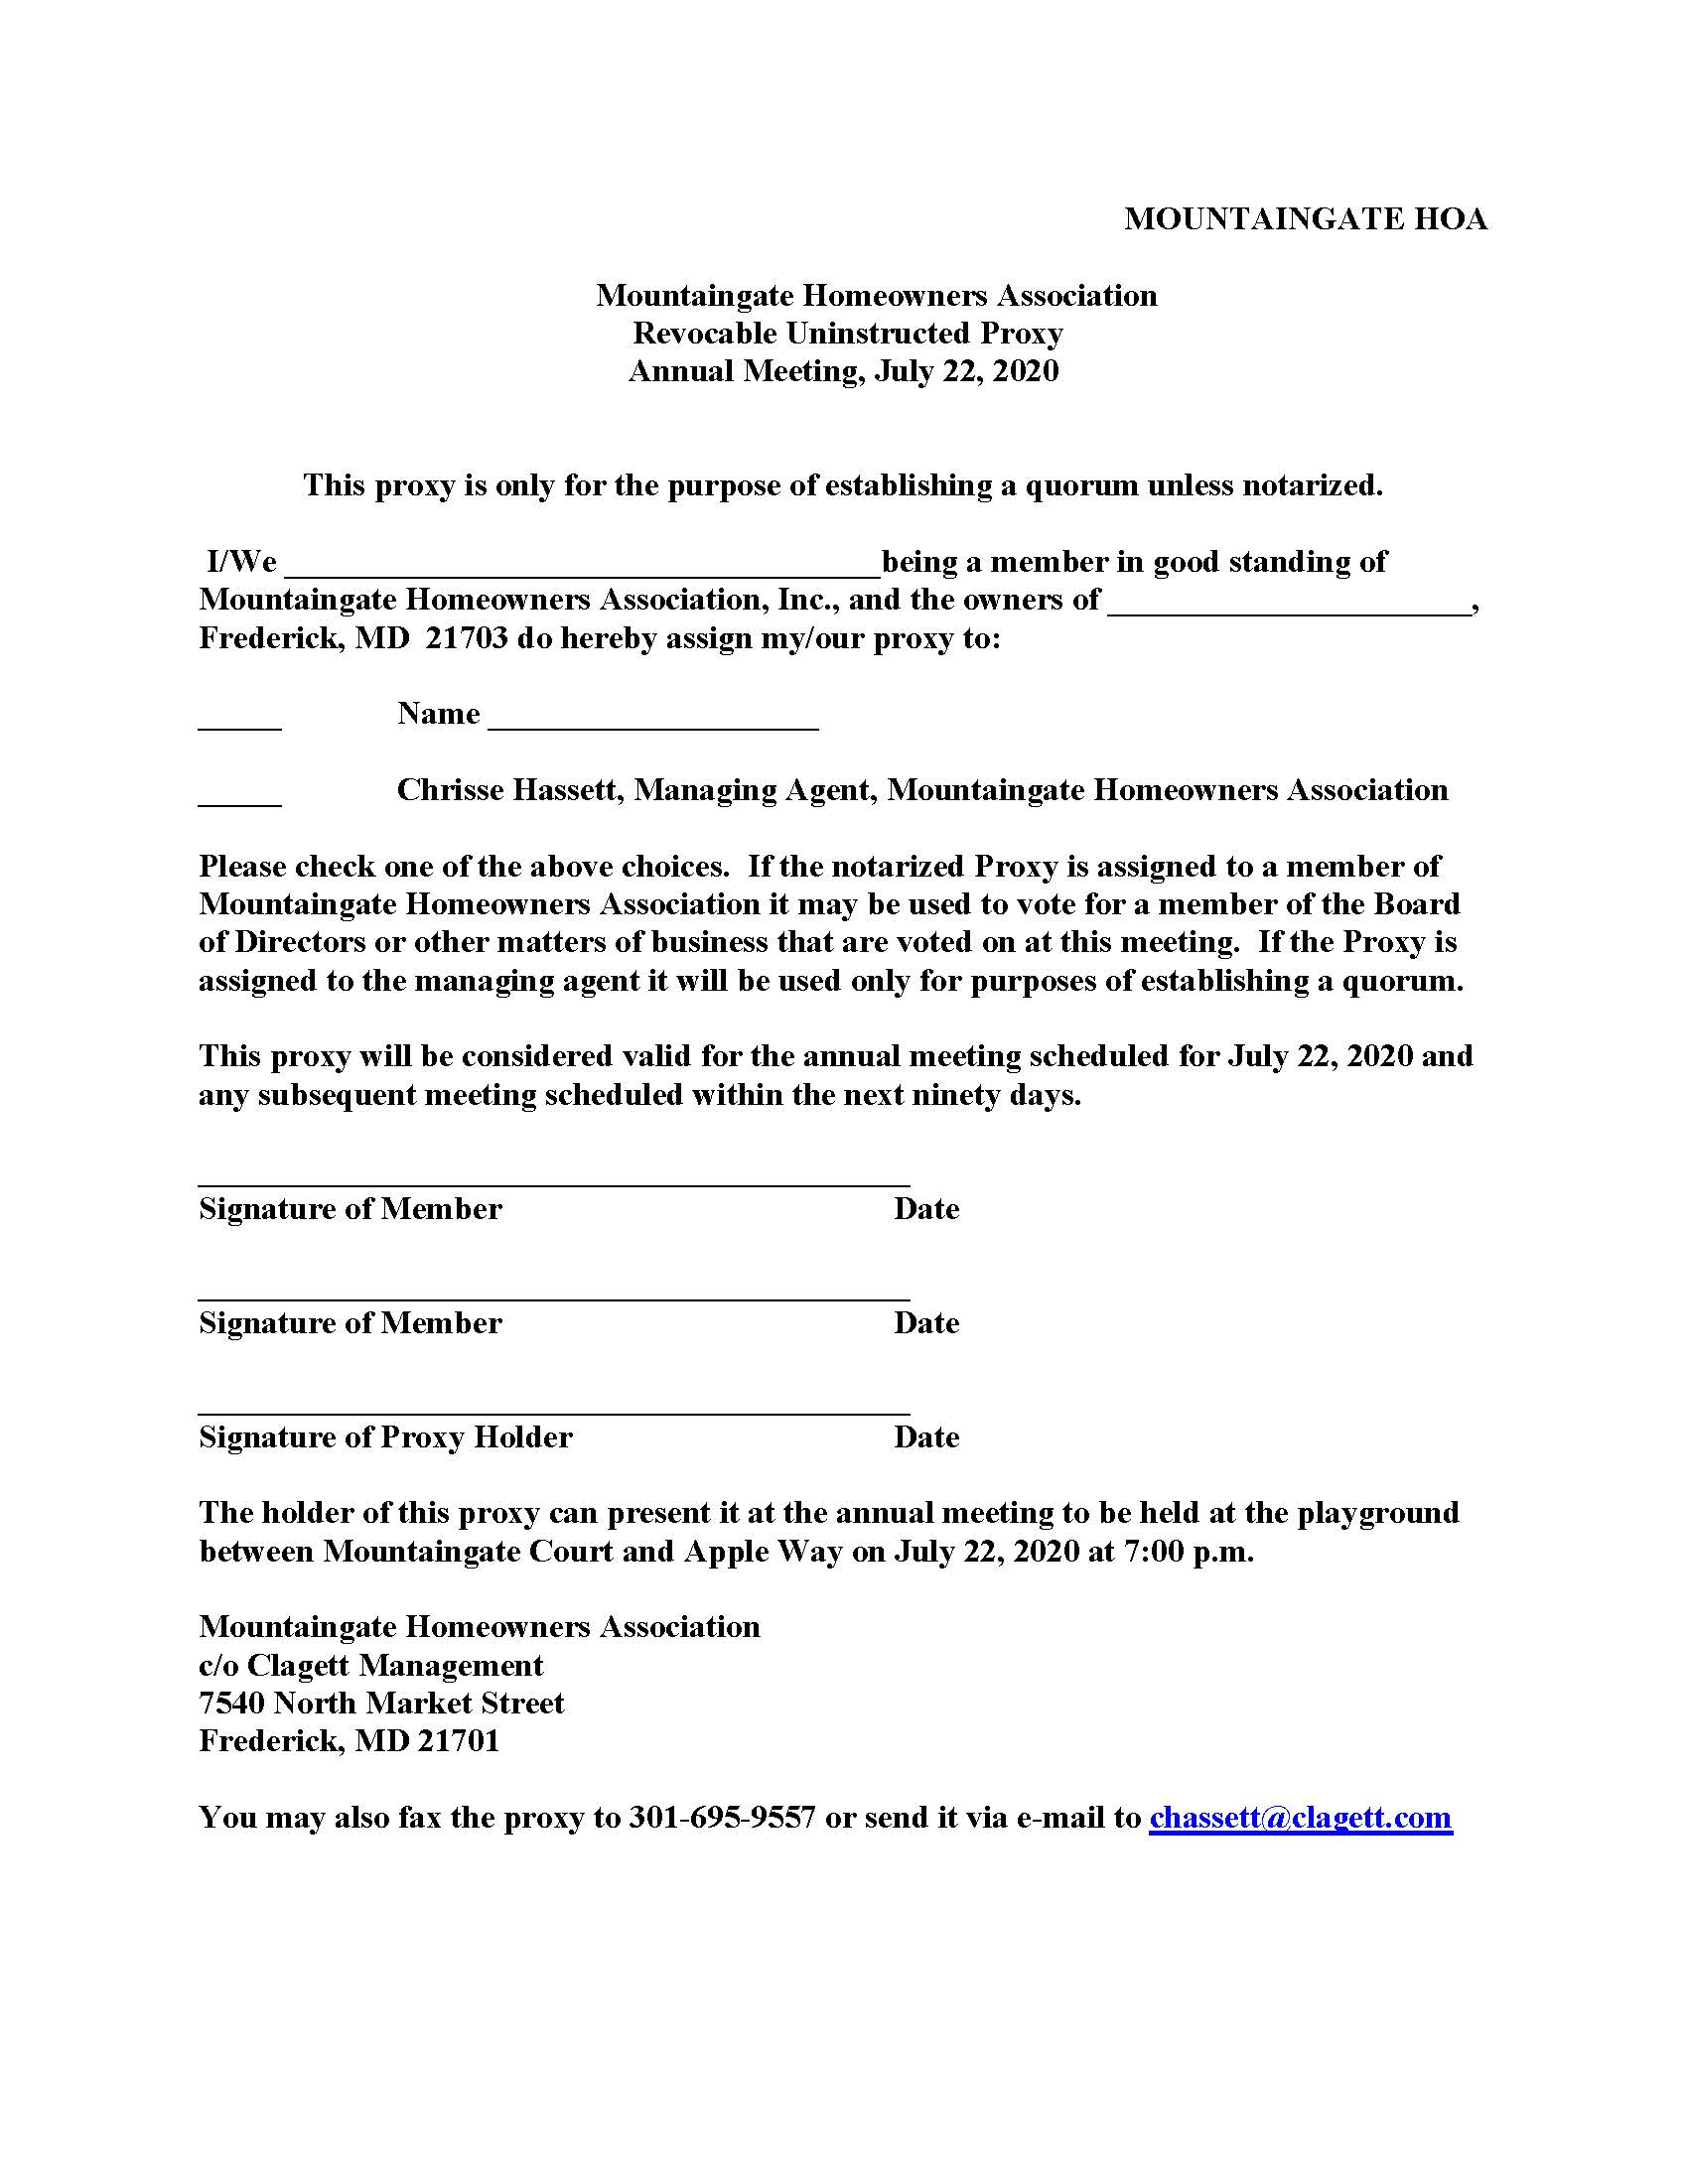 mountaingate-homeowners-association-notice-of-annual-meeting